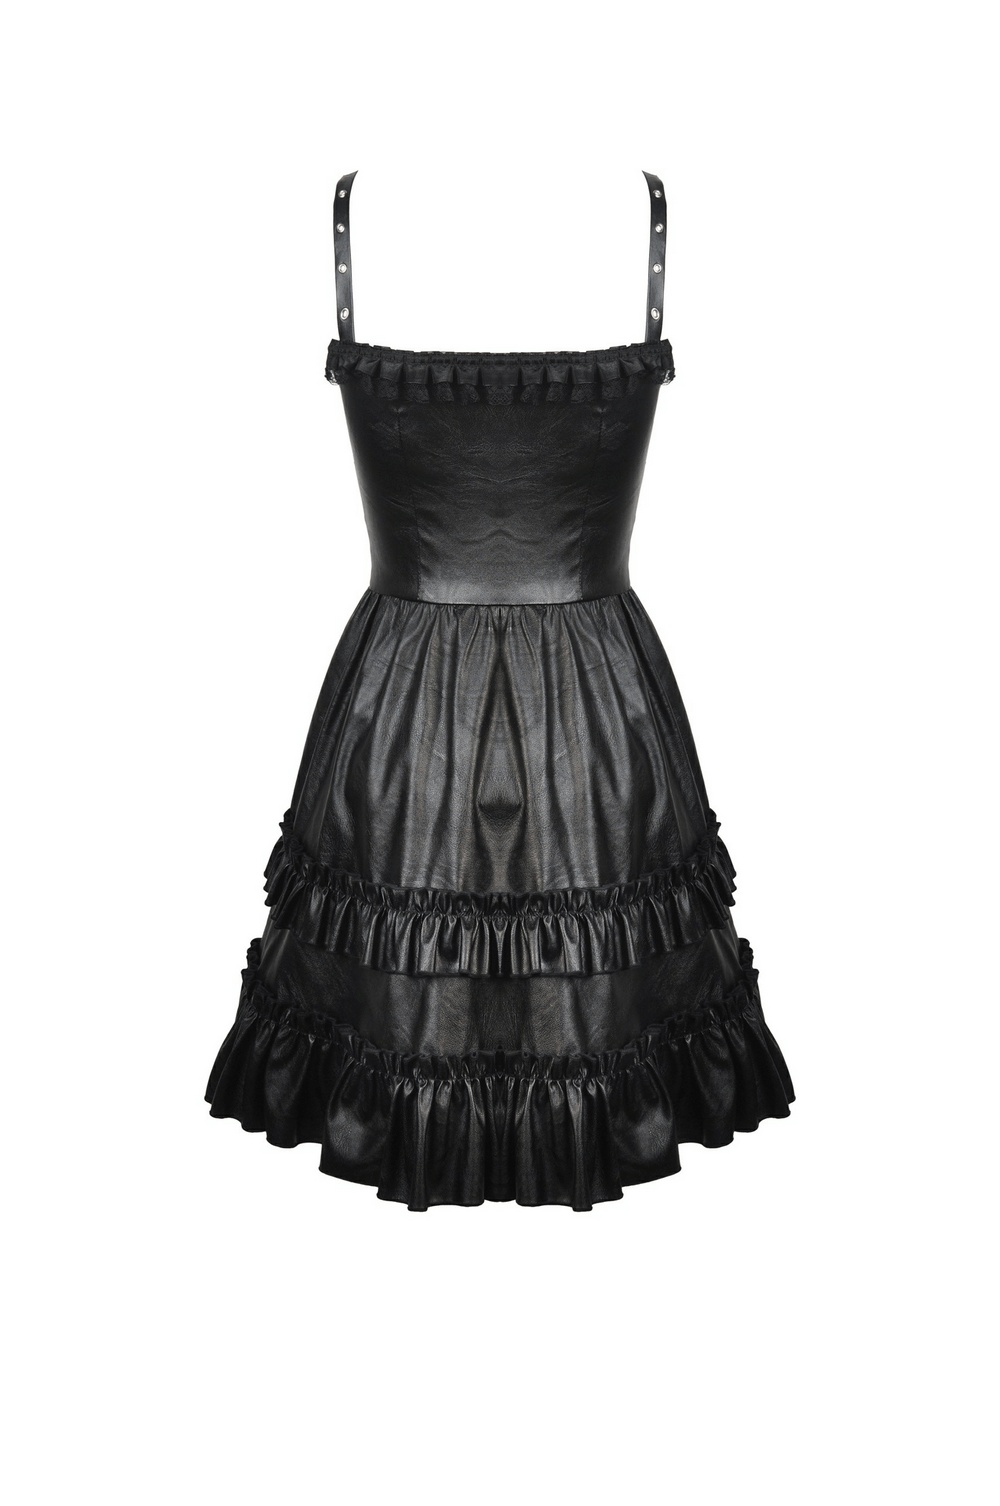 Elegant Black Leather Dress with Ruffled Layers and Belt